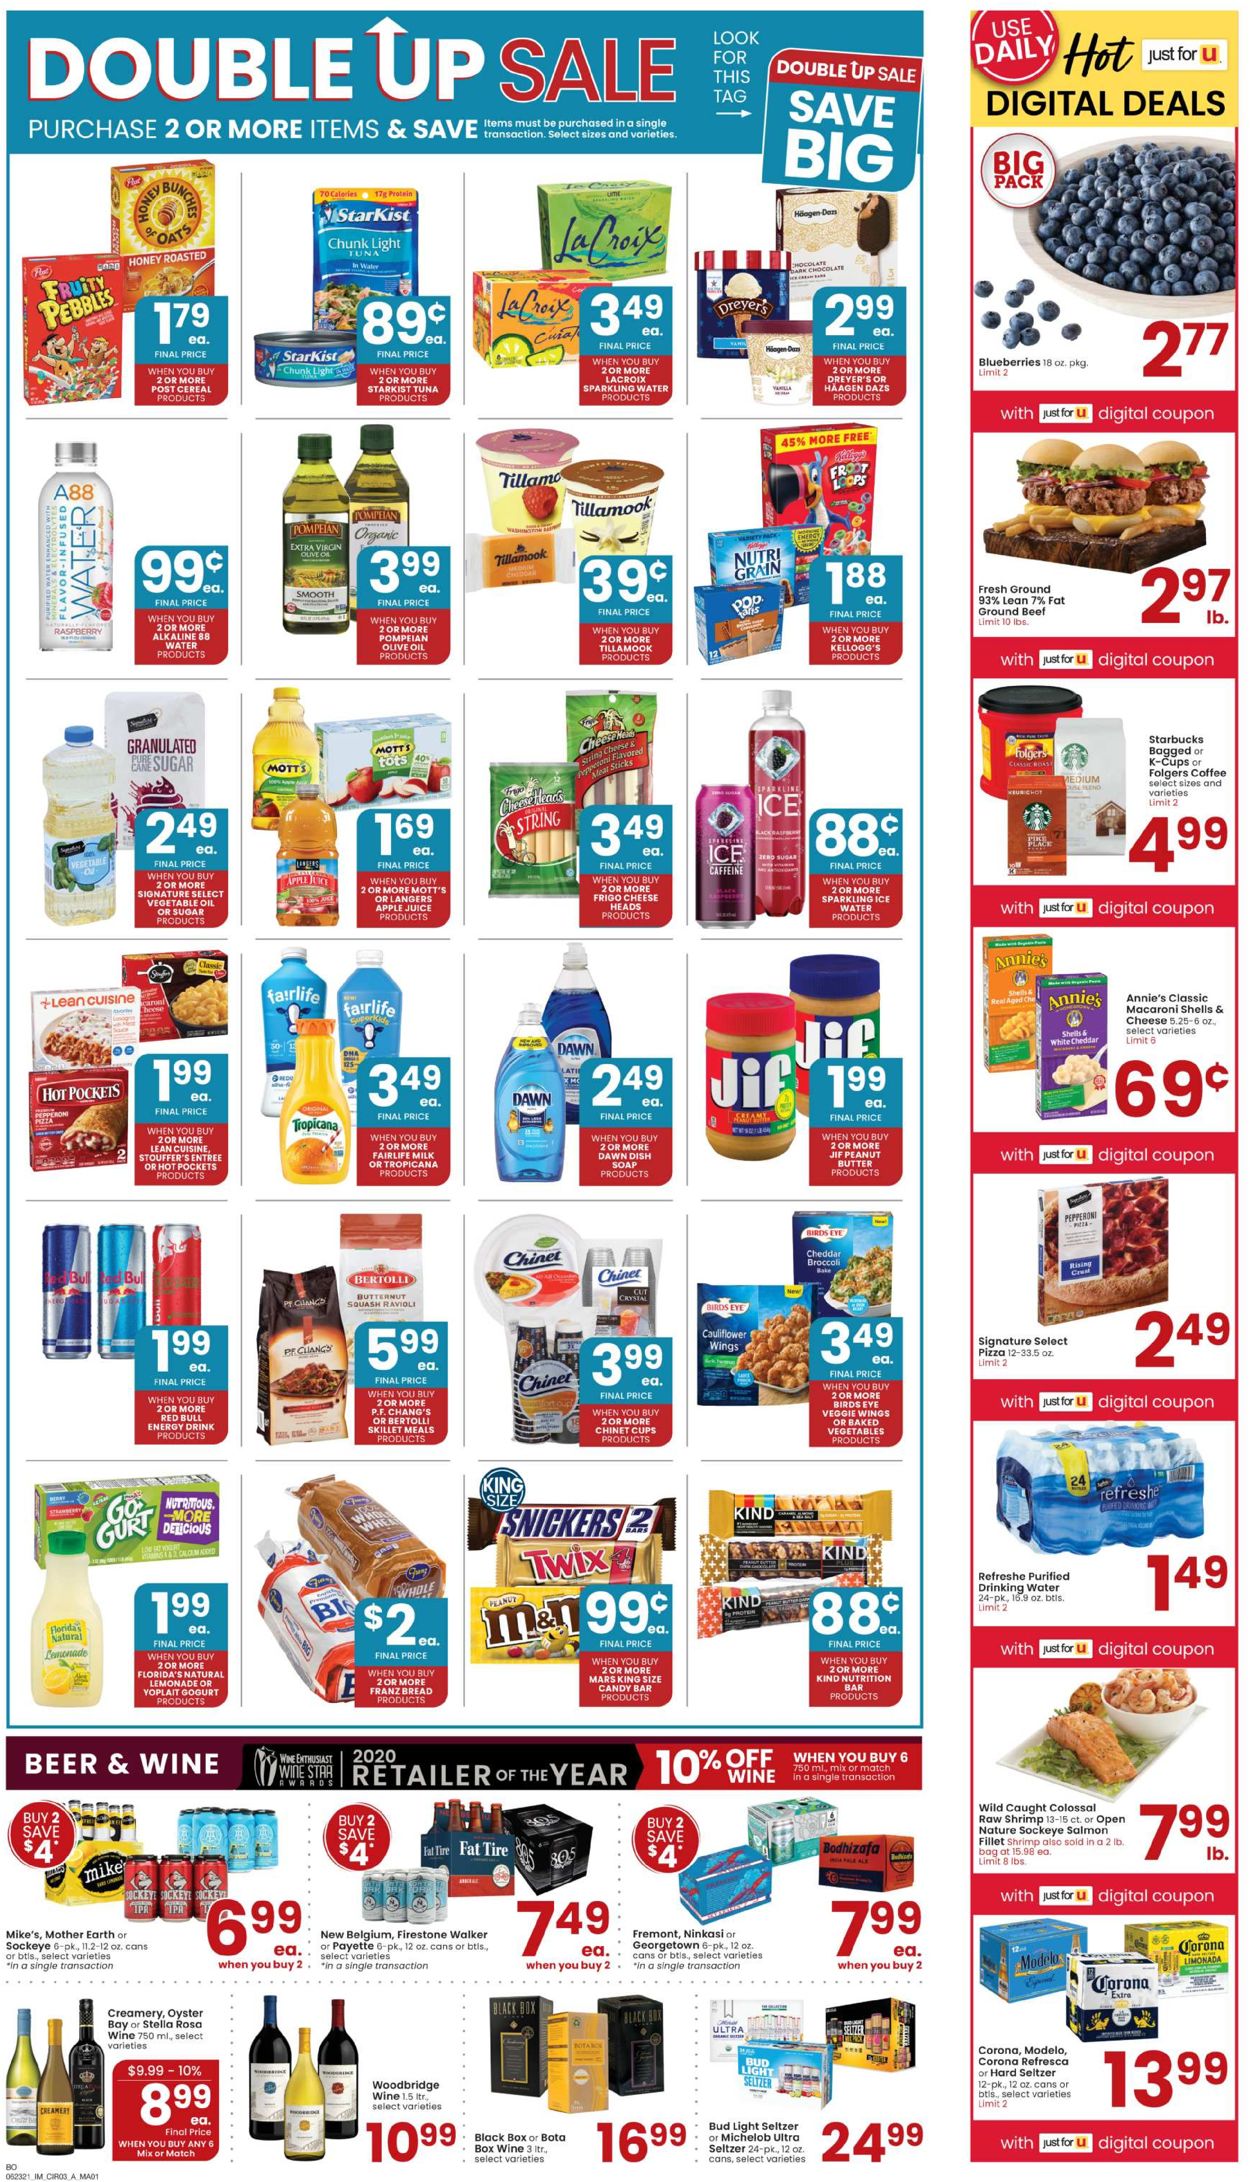 Albertsons Current weekly ad 06/23 - 06/29/2021 [3] - frequent-ads.com